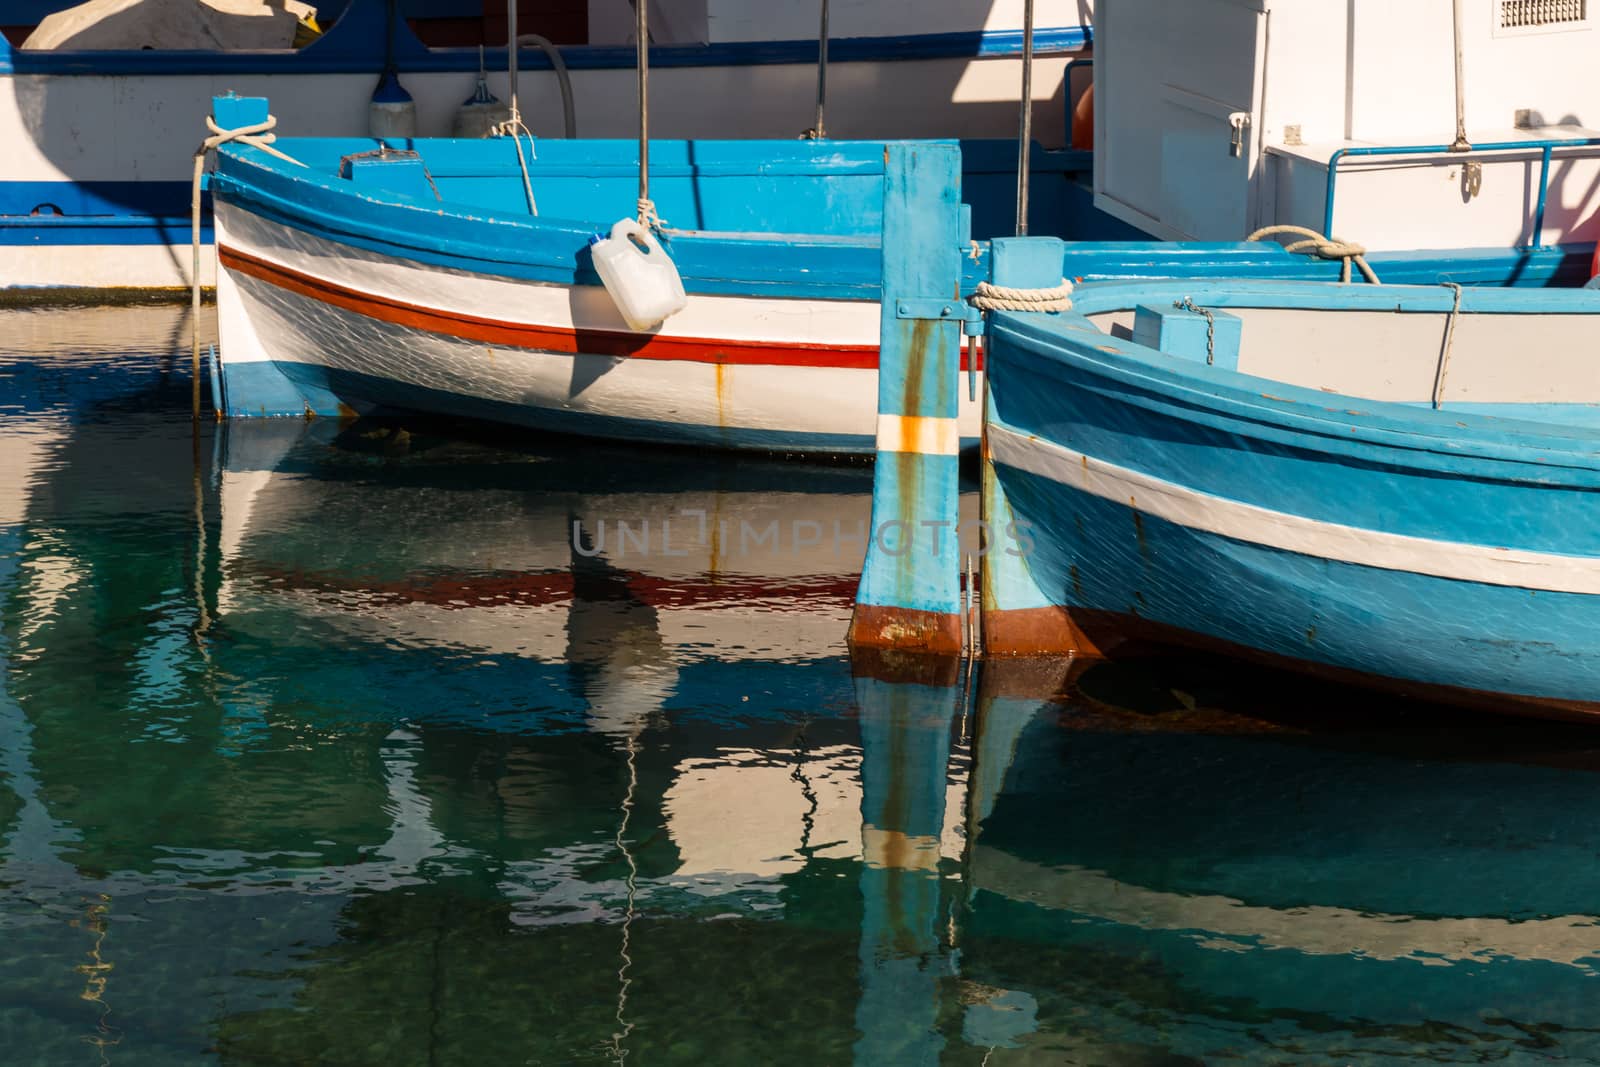 Tradtional fishing boat - Sicily by alanstix64